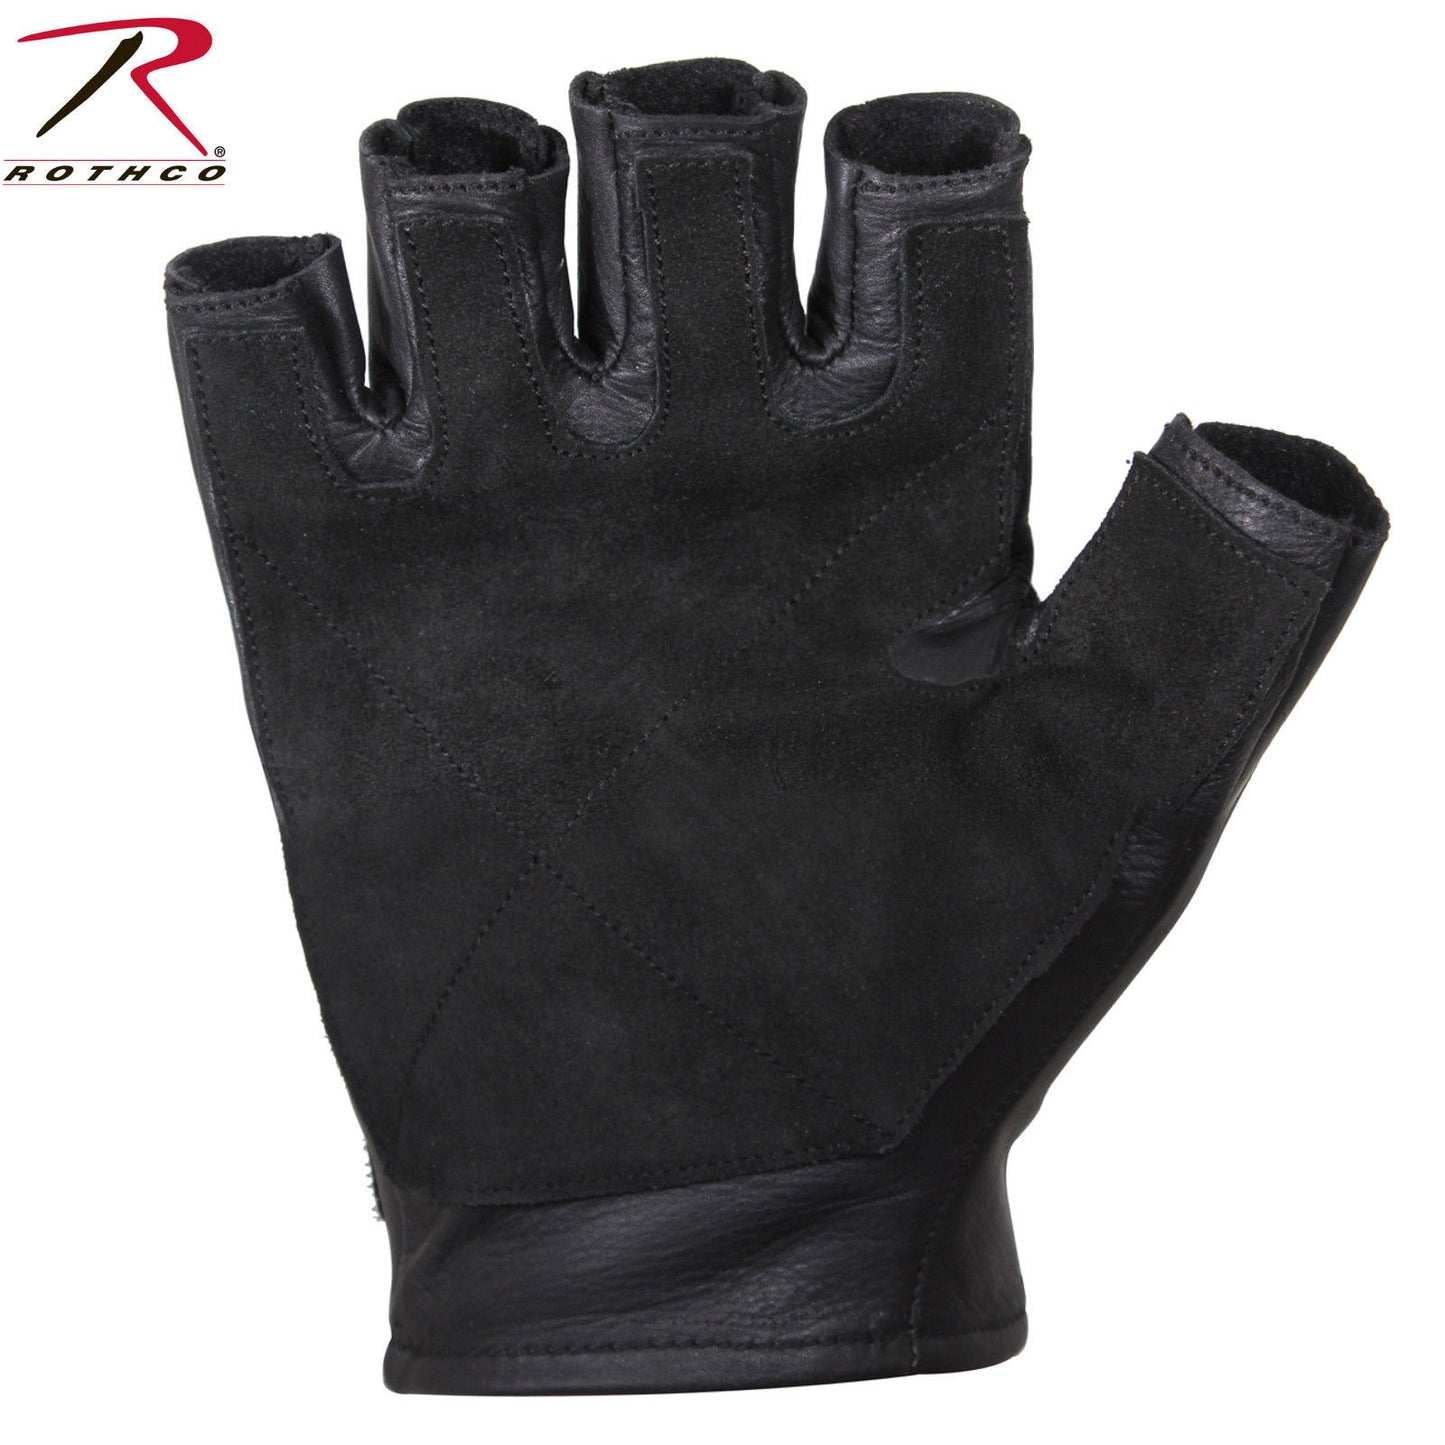 Rothco Black Tactical Fingerless Padded Gloves - Leather & Suede Gloves 2817